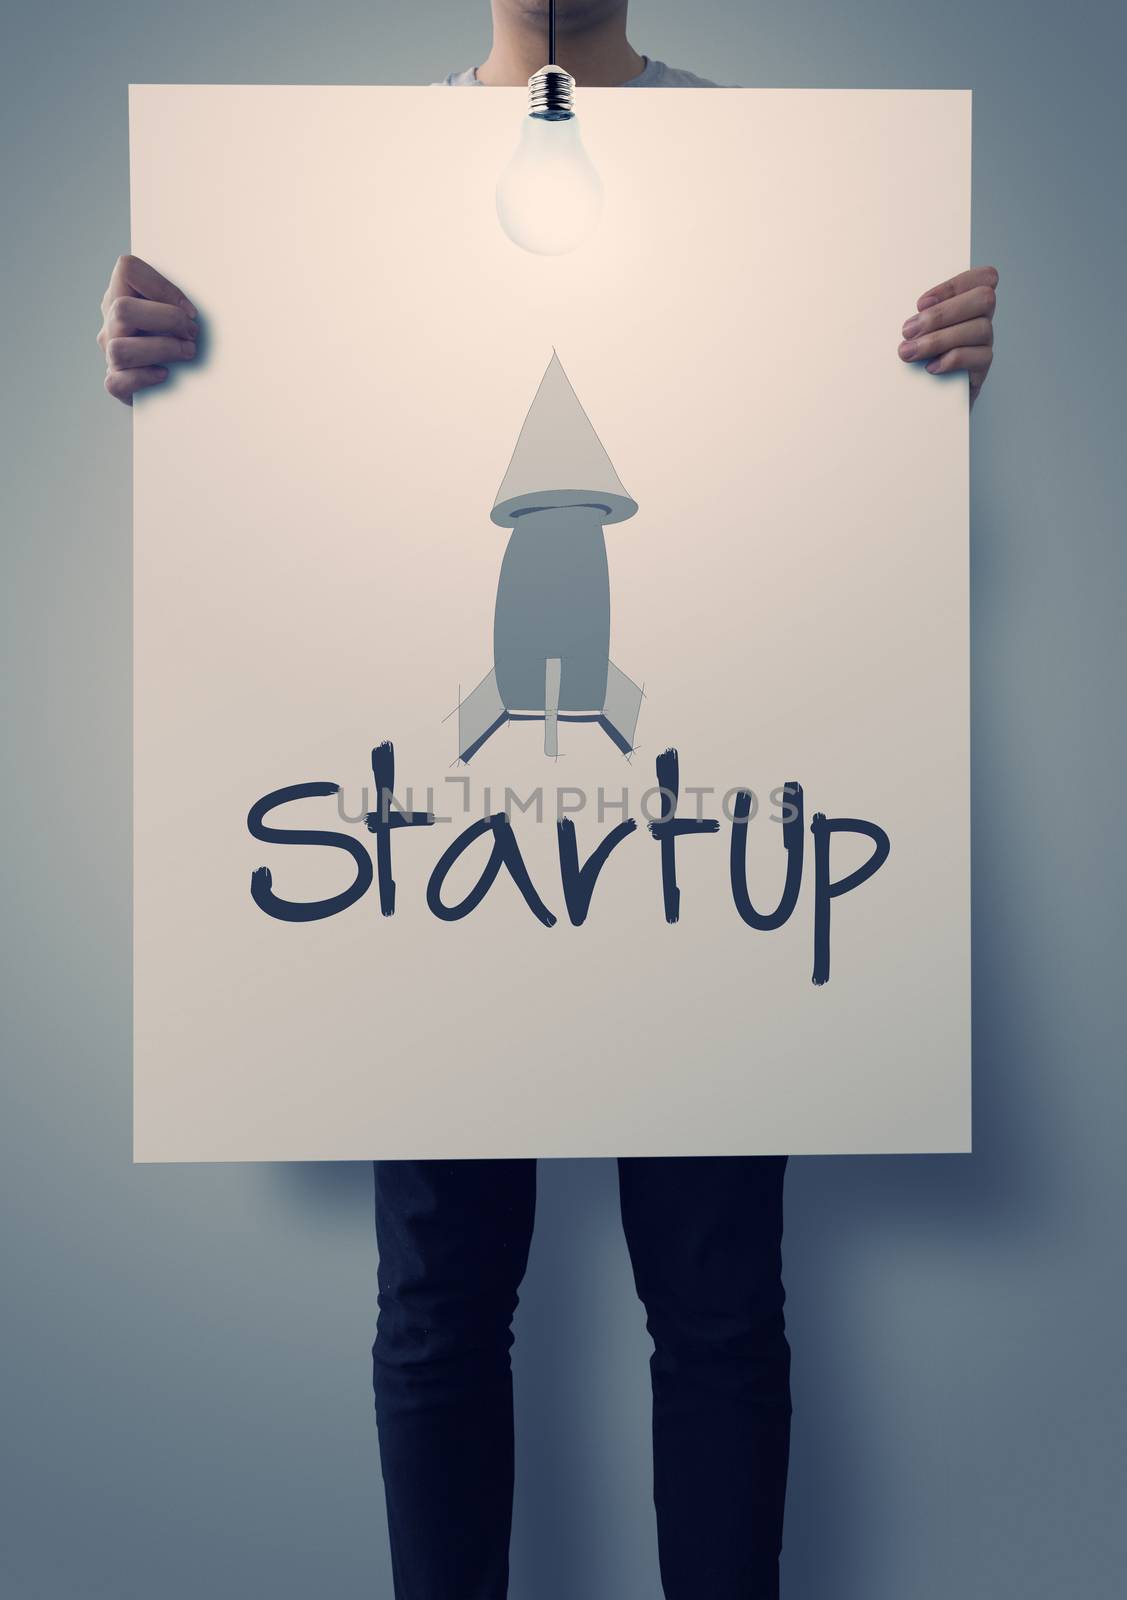 businessman hand showing poster of start up icon as concept 